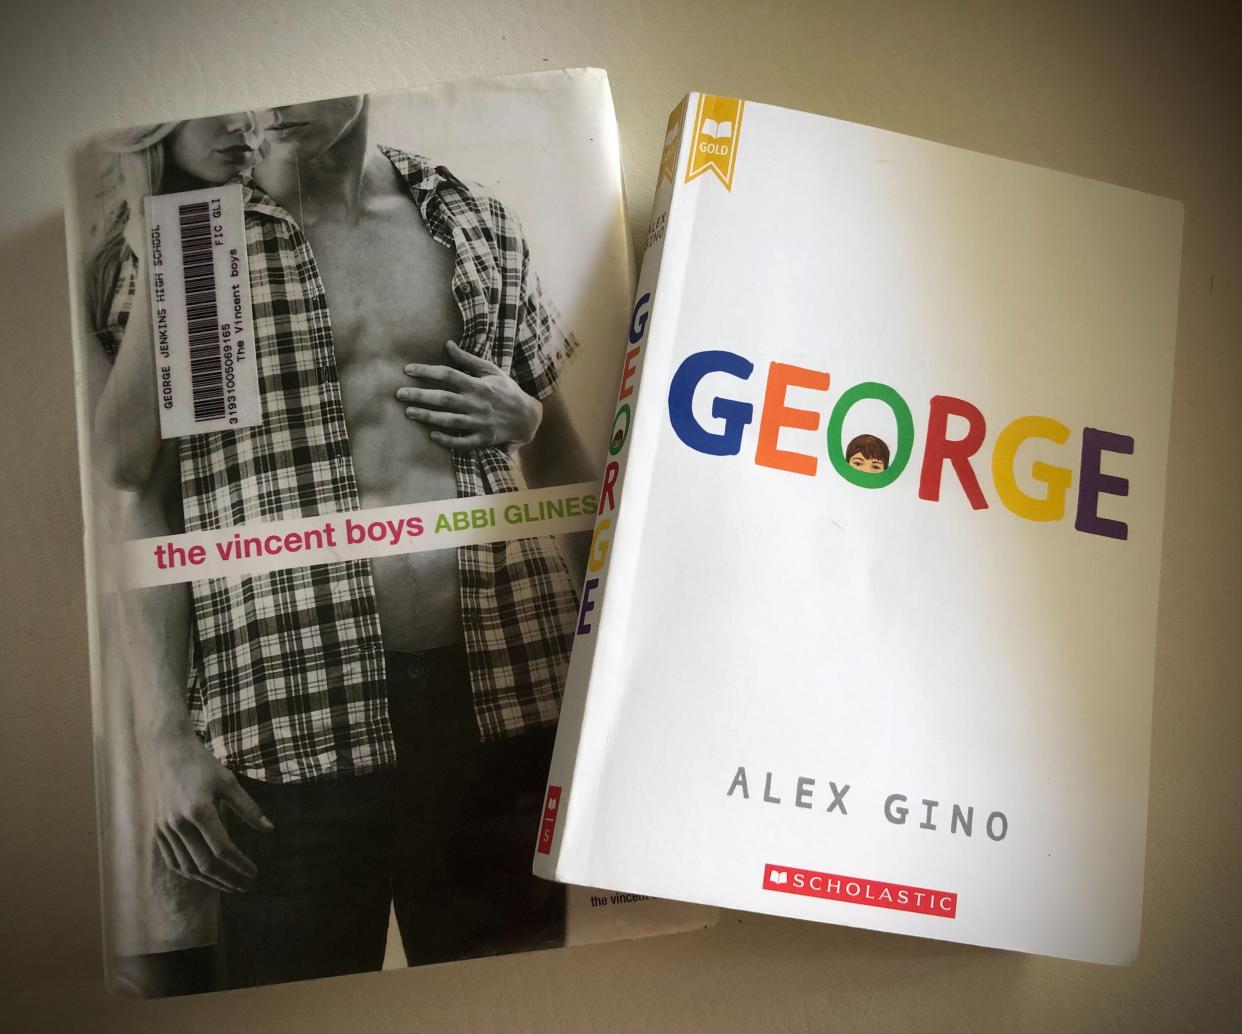 The two books reviewed this week by Polk County Public Schools committees were "The Vincent Boys" by Abii Glines and "George" by Alex Gino.